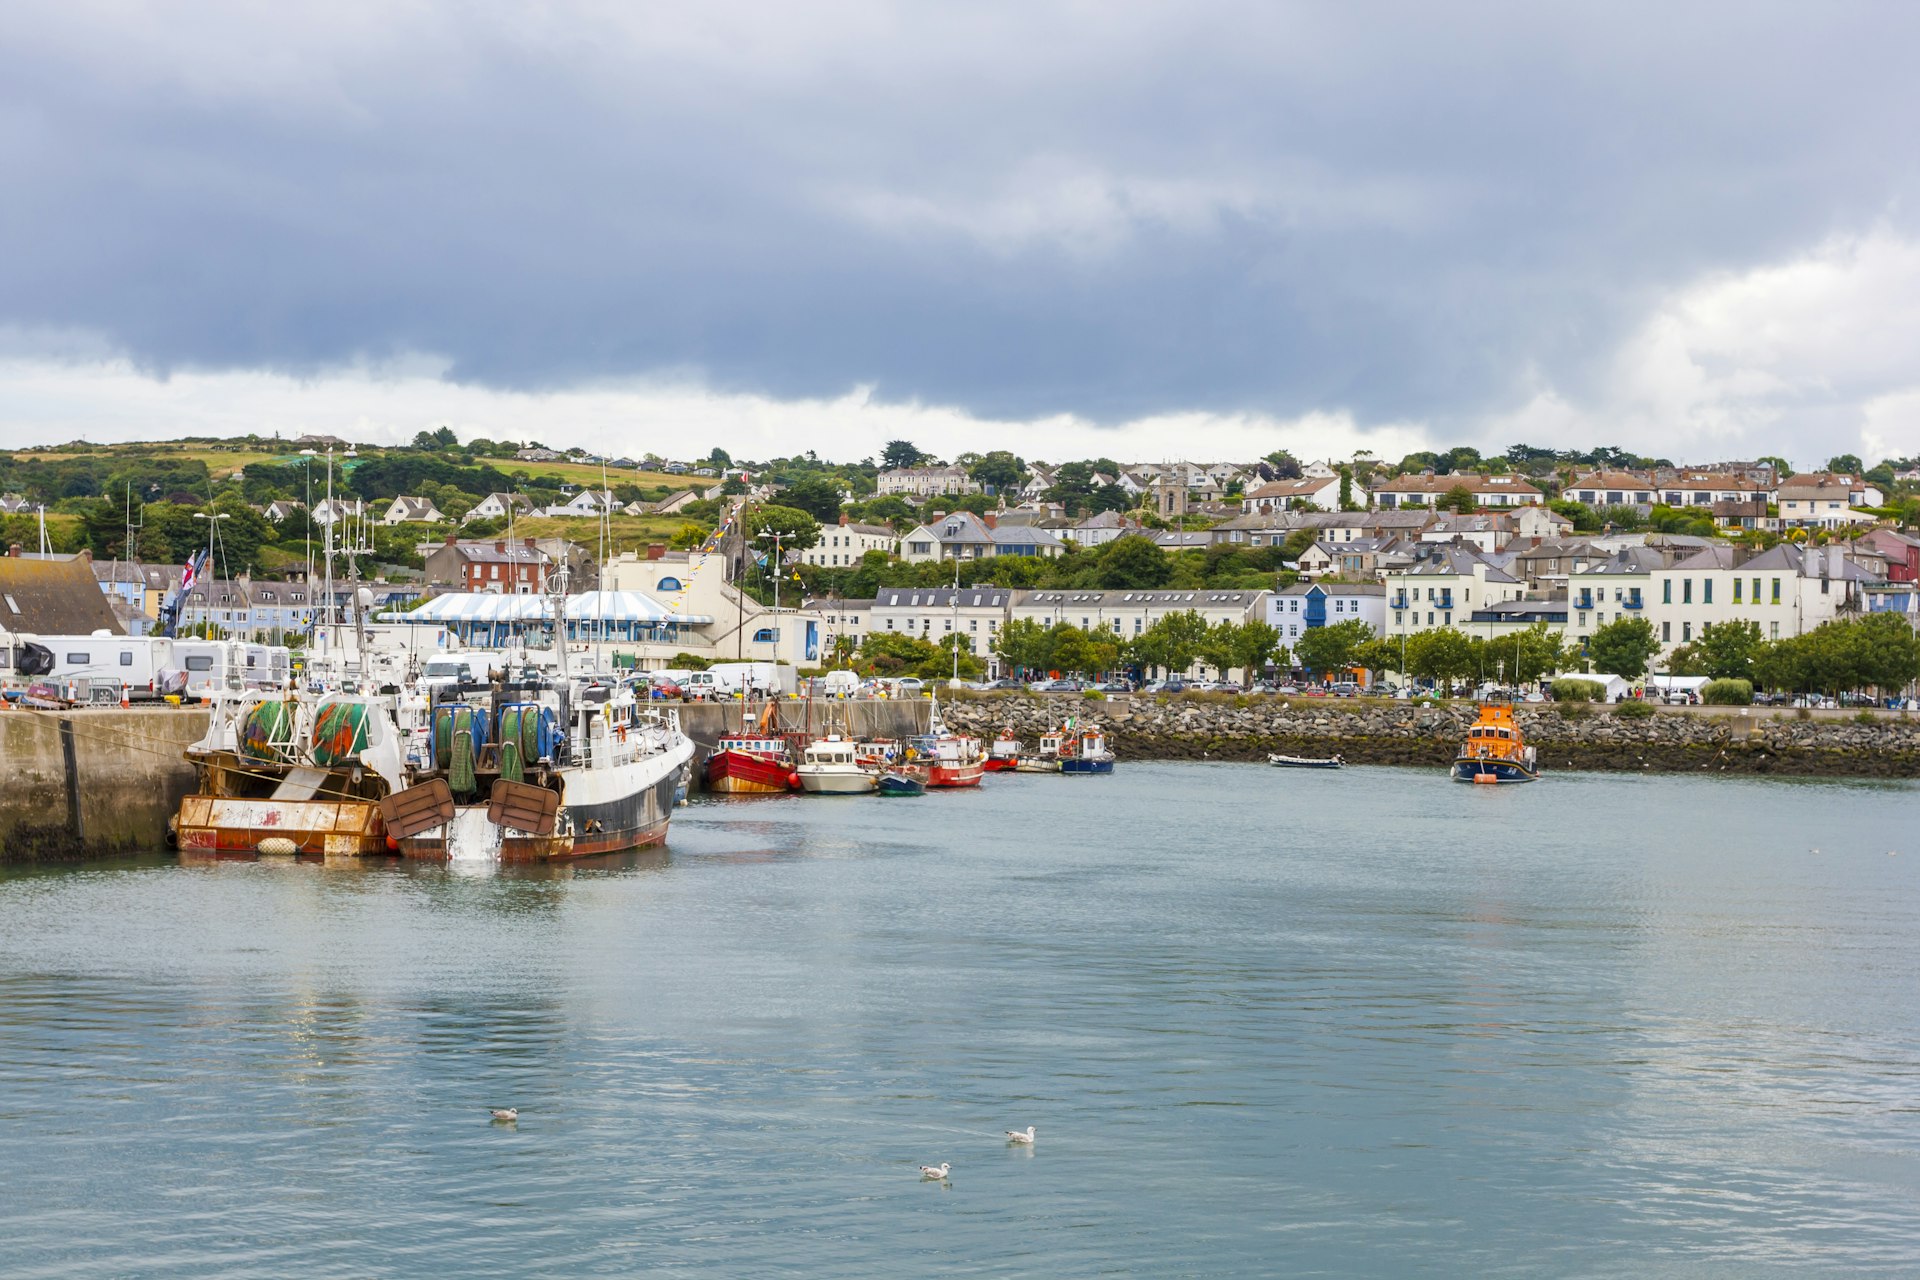 Fishing boats docked in Howth Harbour, Dublin